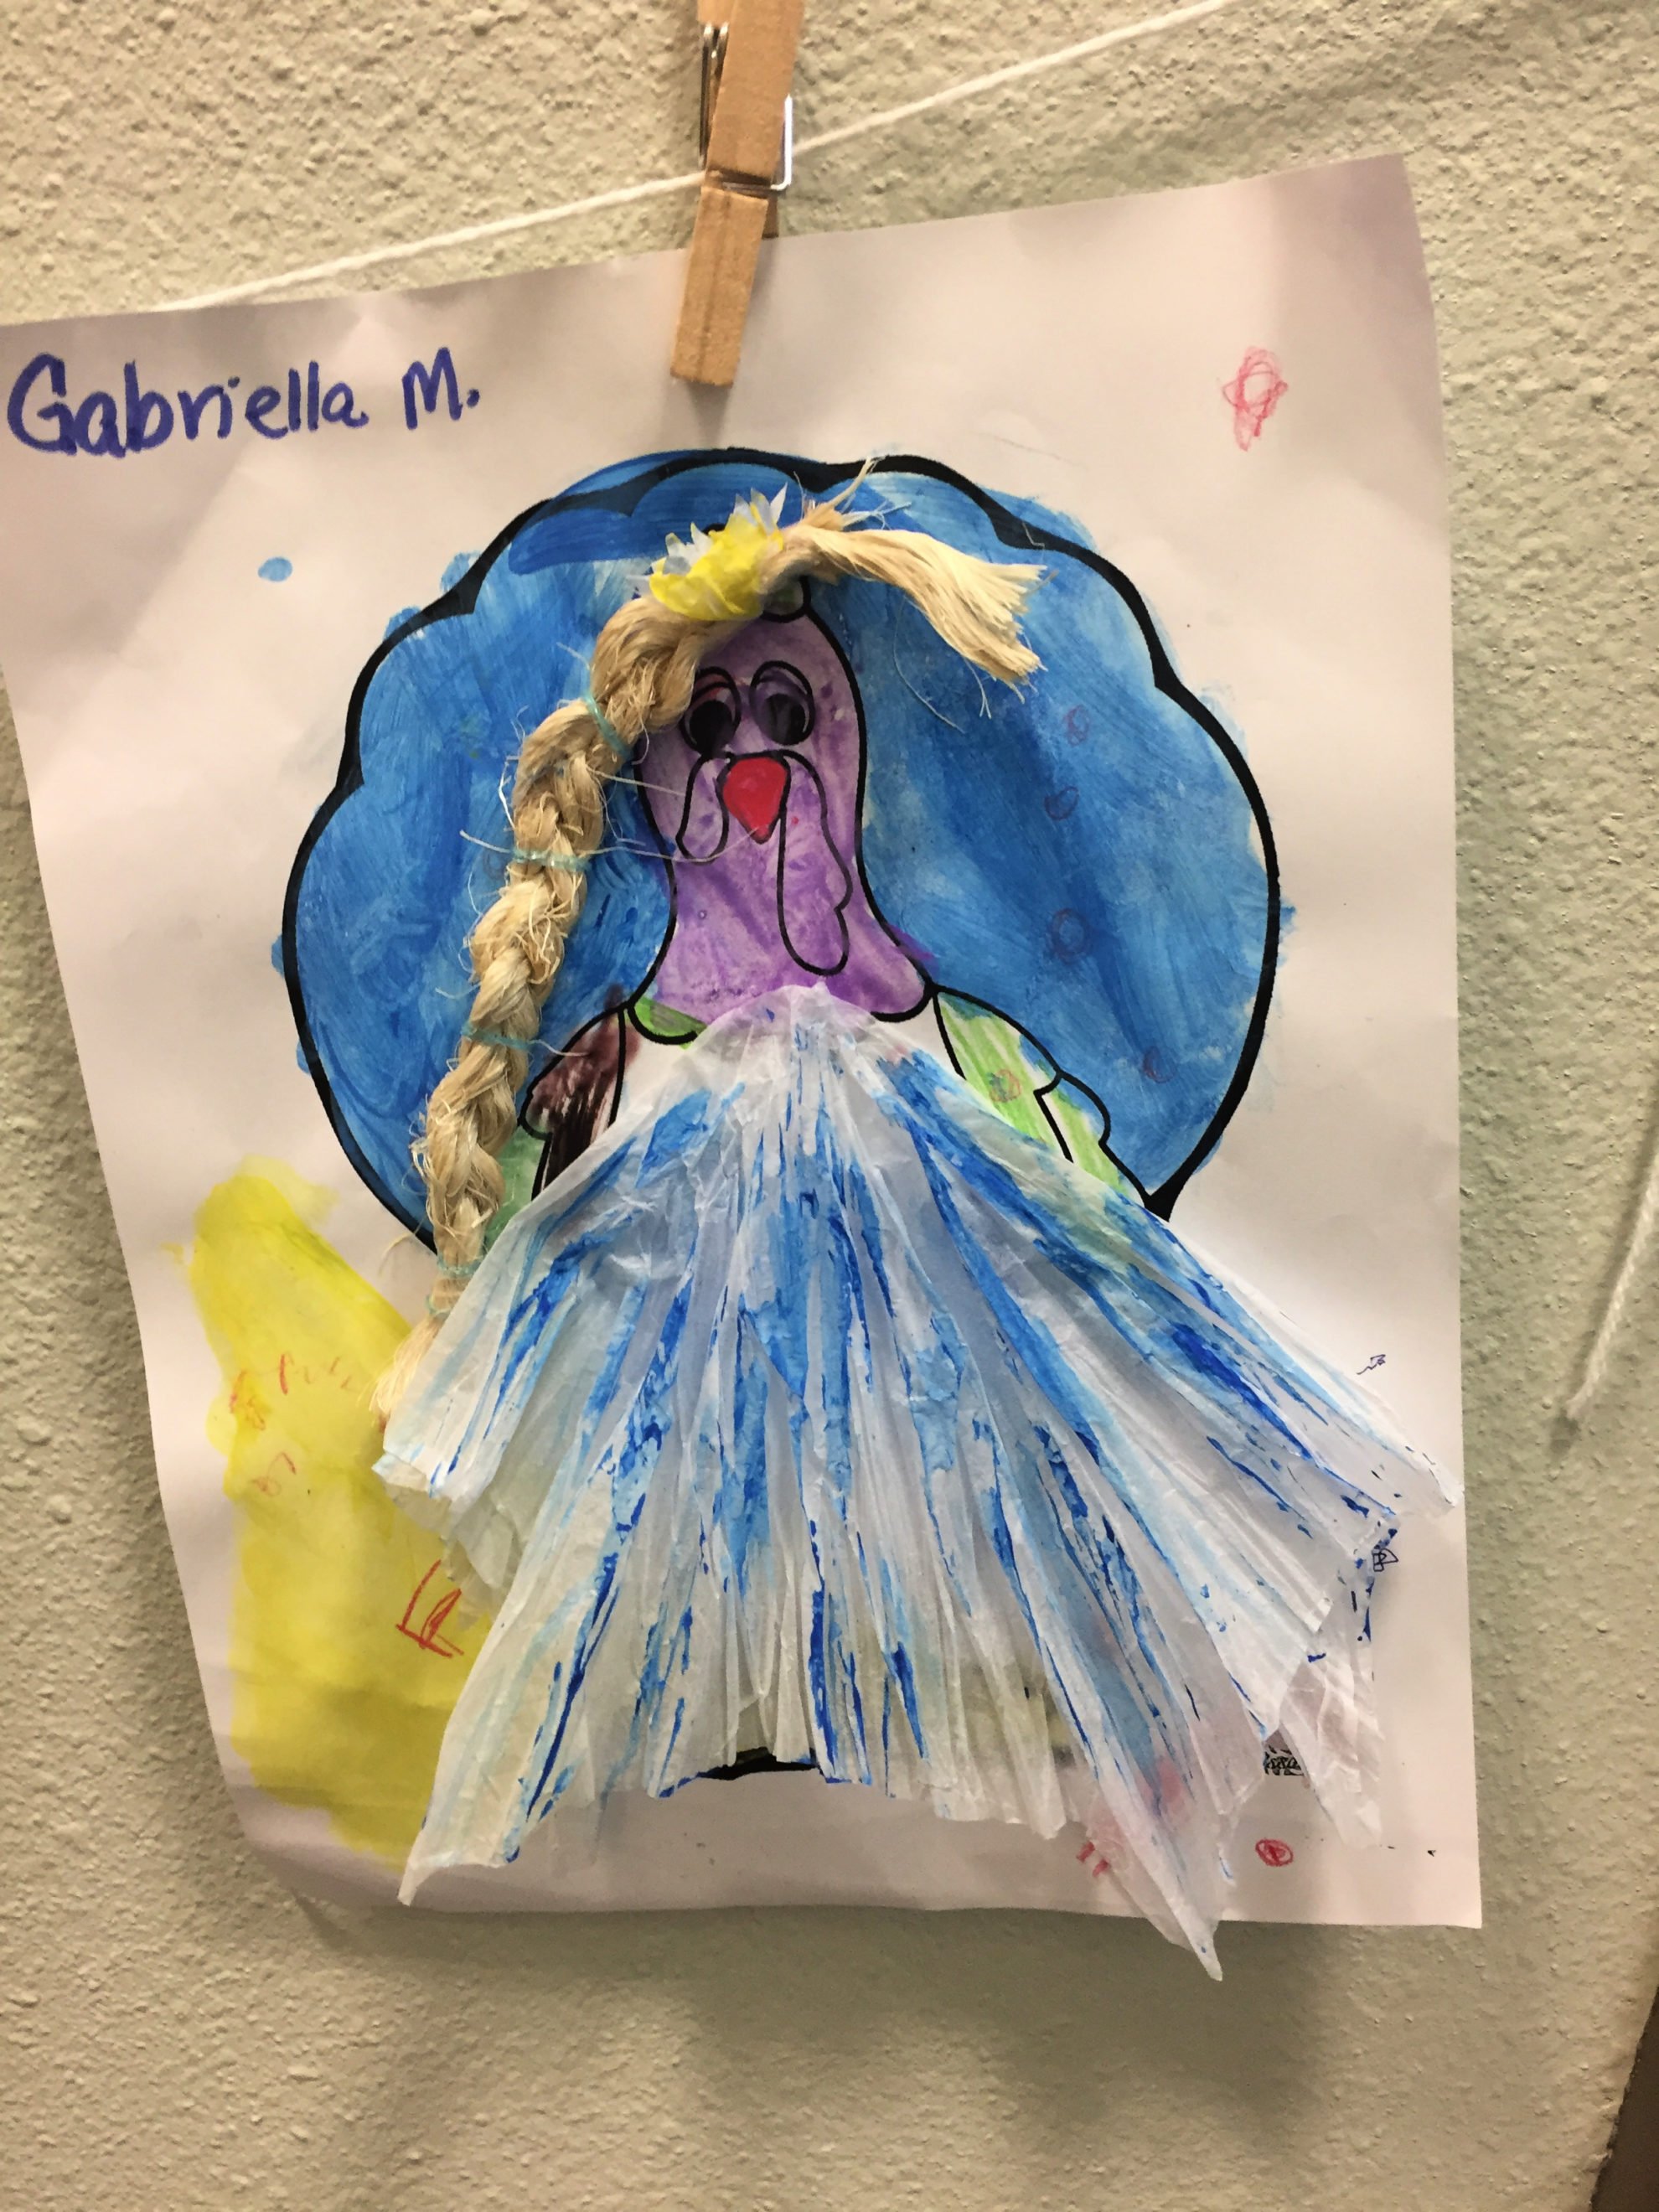 Paper Turkey In Disguise dressed as Elsa with a white and blue tissue paper dress, and a braided rope for hair.